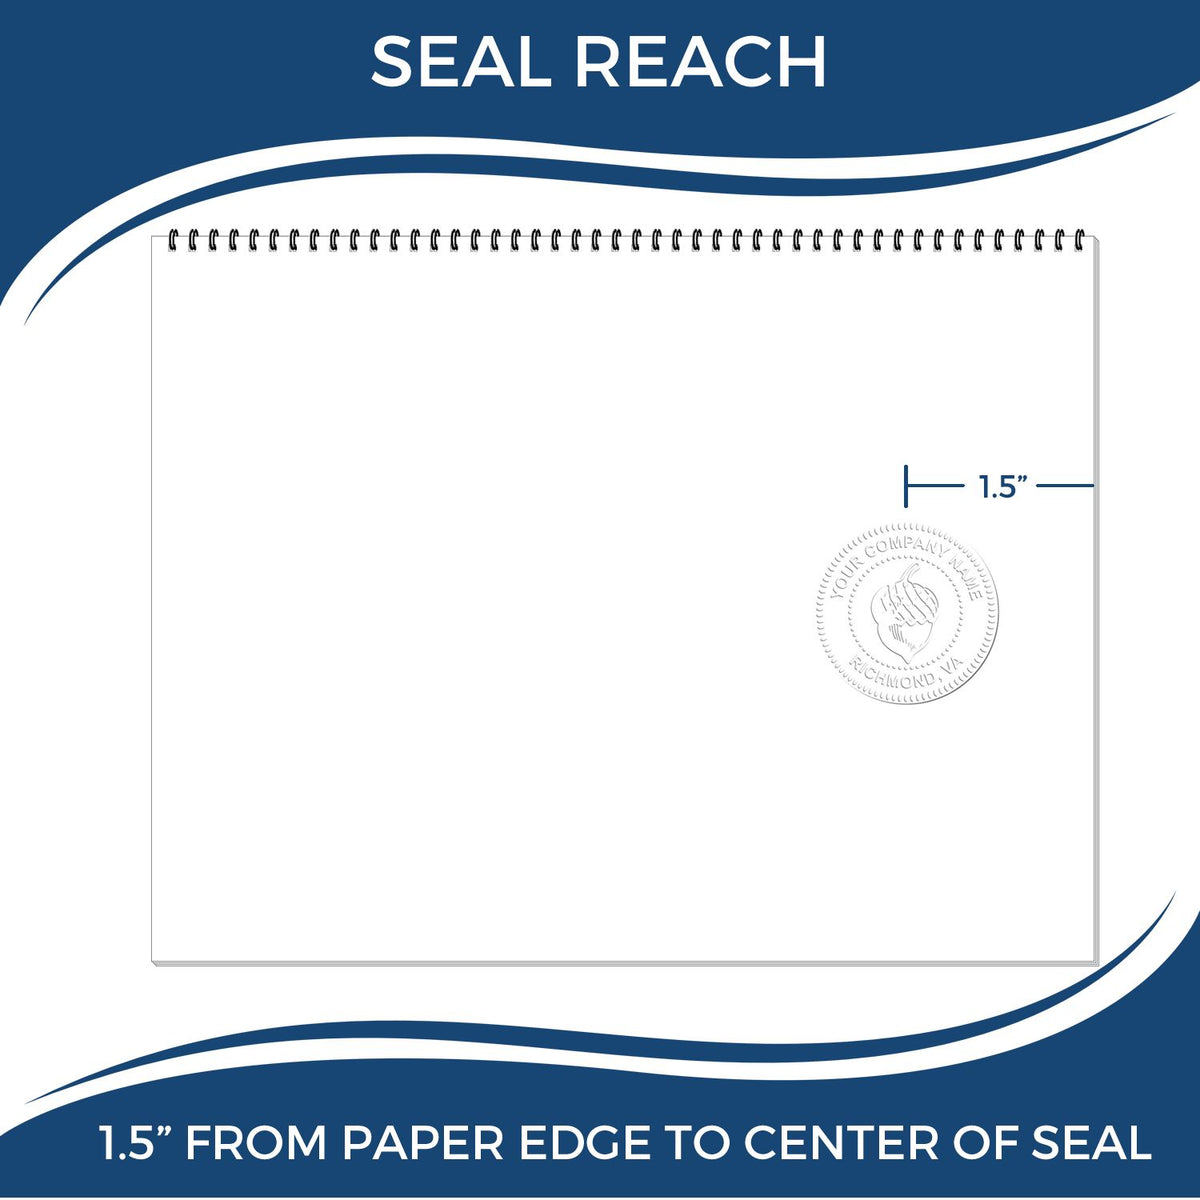 An infographic showing the seal reach which is represented by a ruler and a miniature seal image of the Hybrid Georgia Geologist Seal